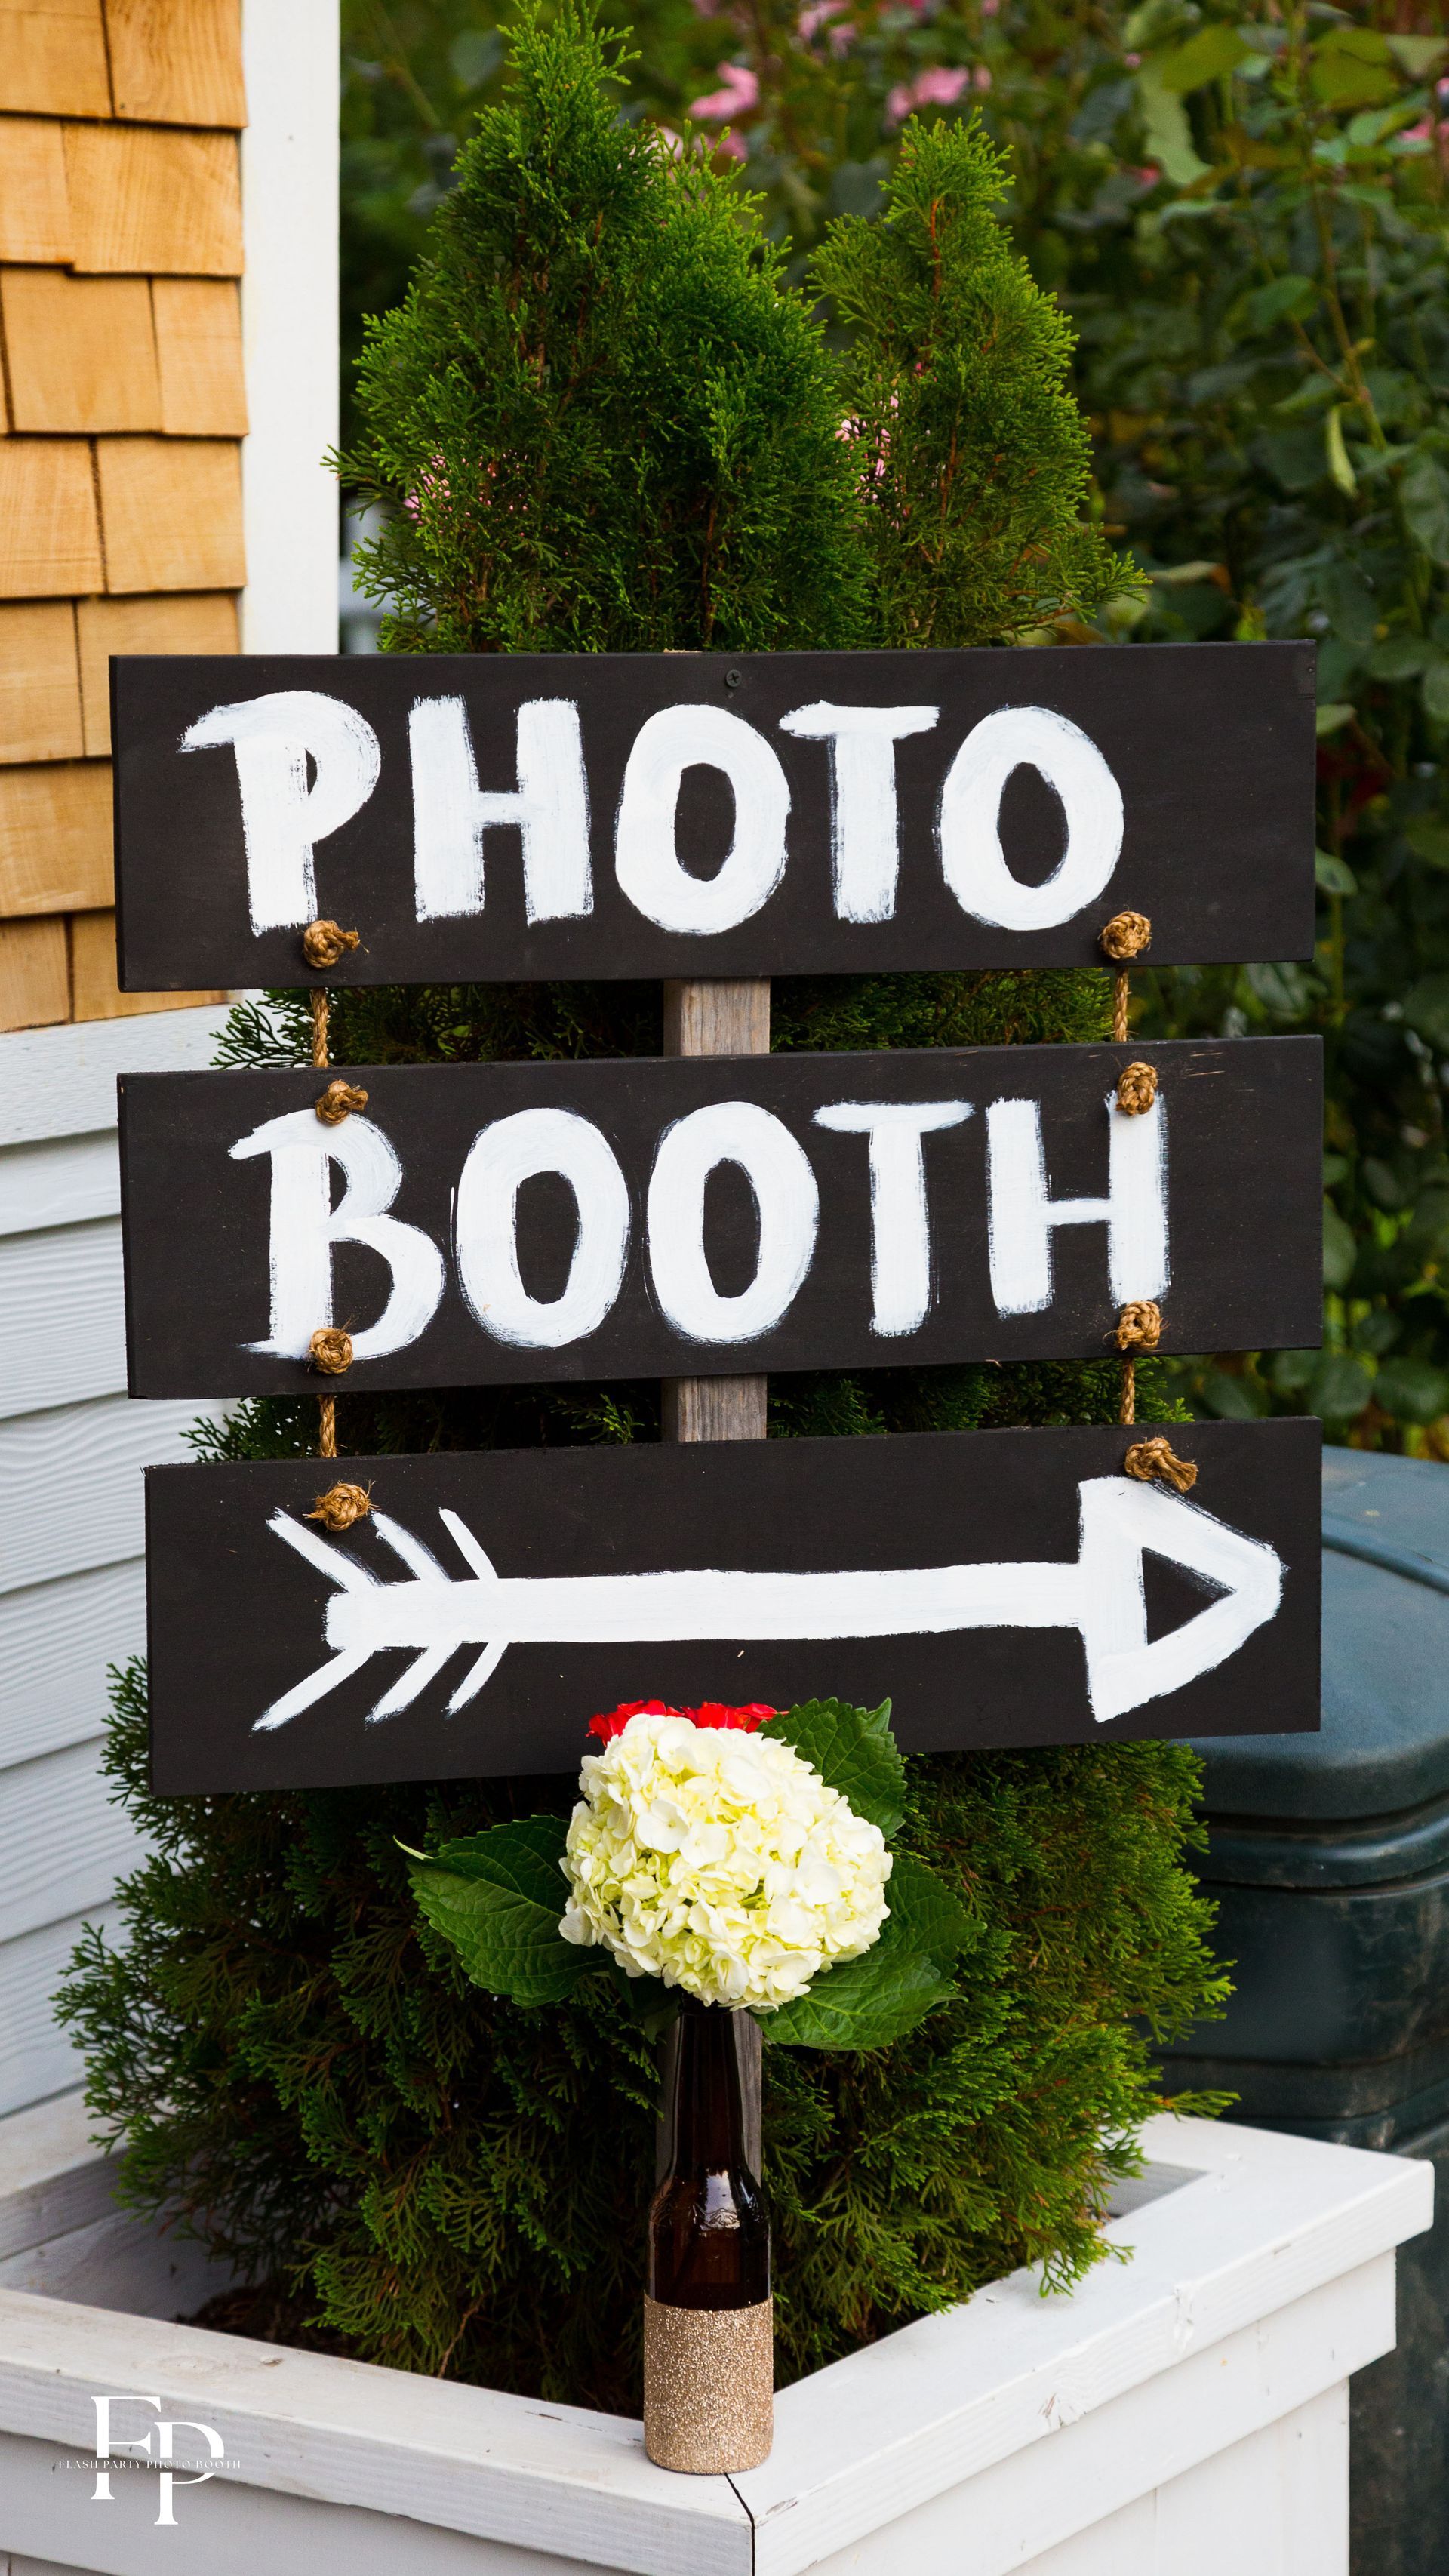 Photo booth rental signage during a wedding in Dallas, Texas